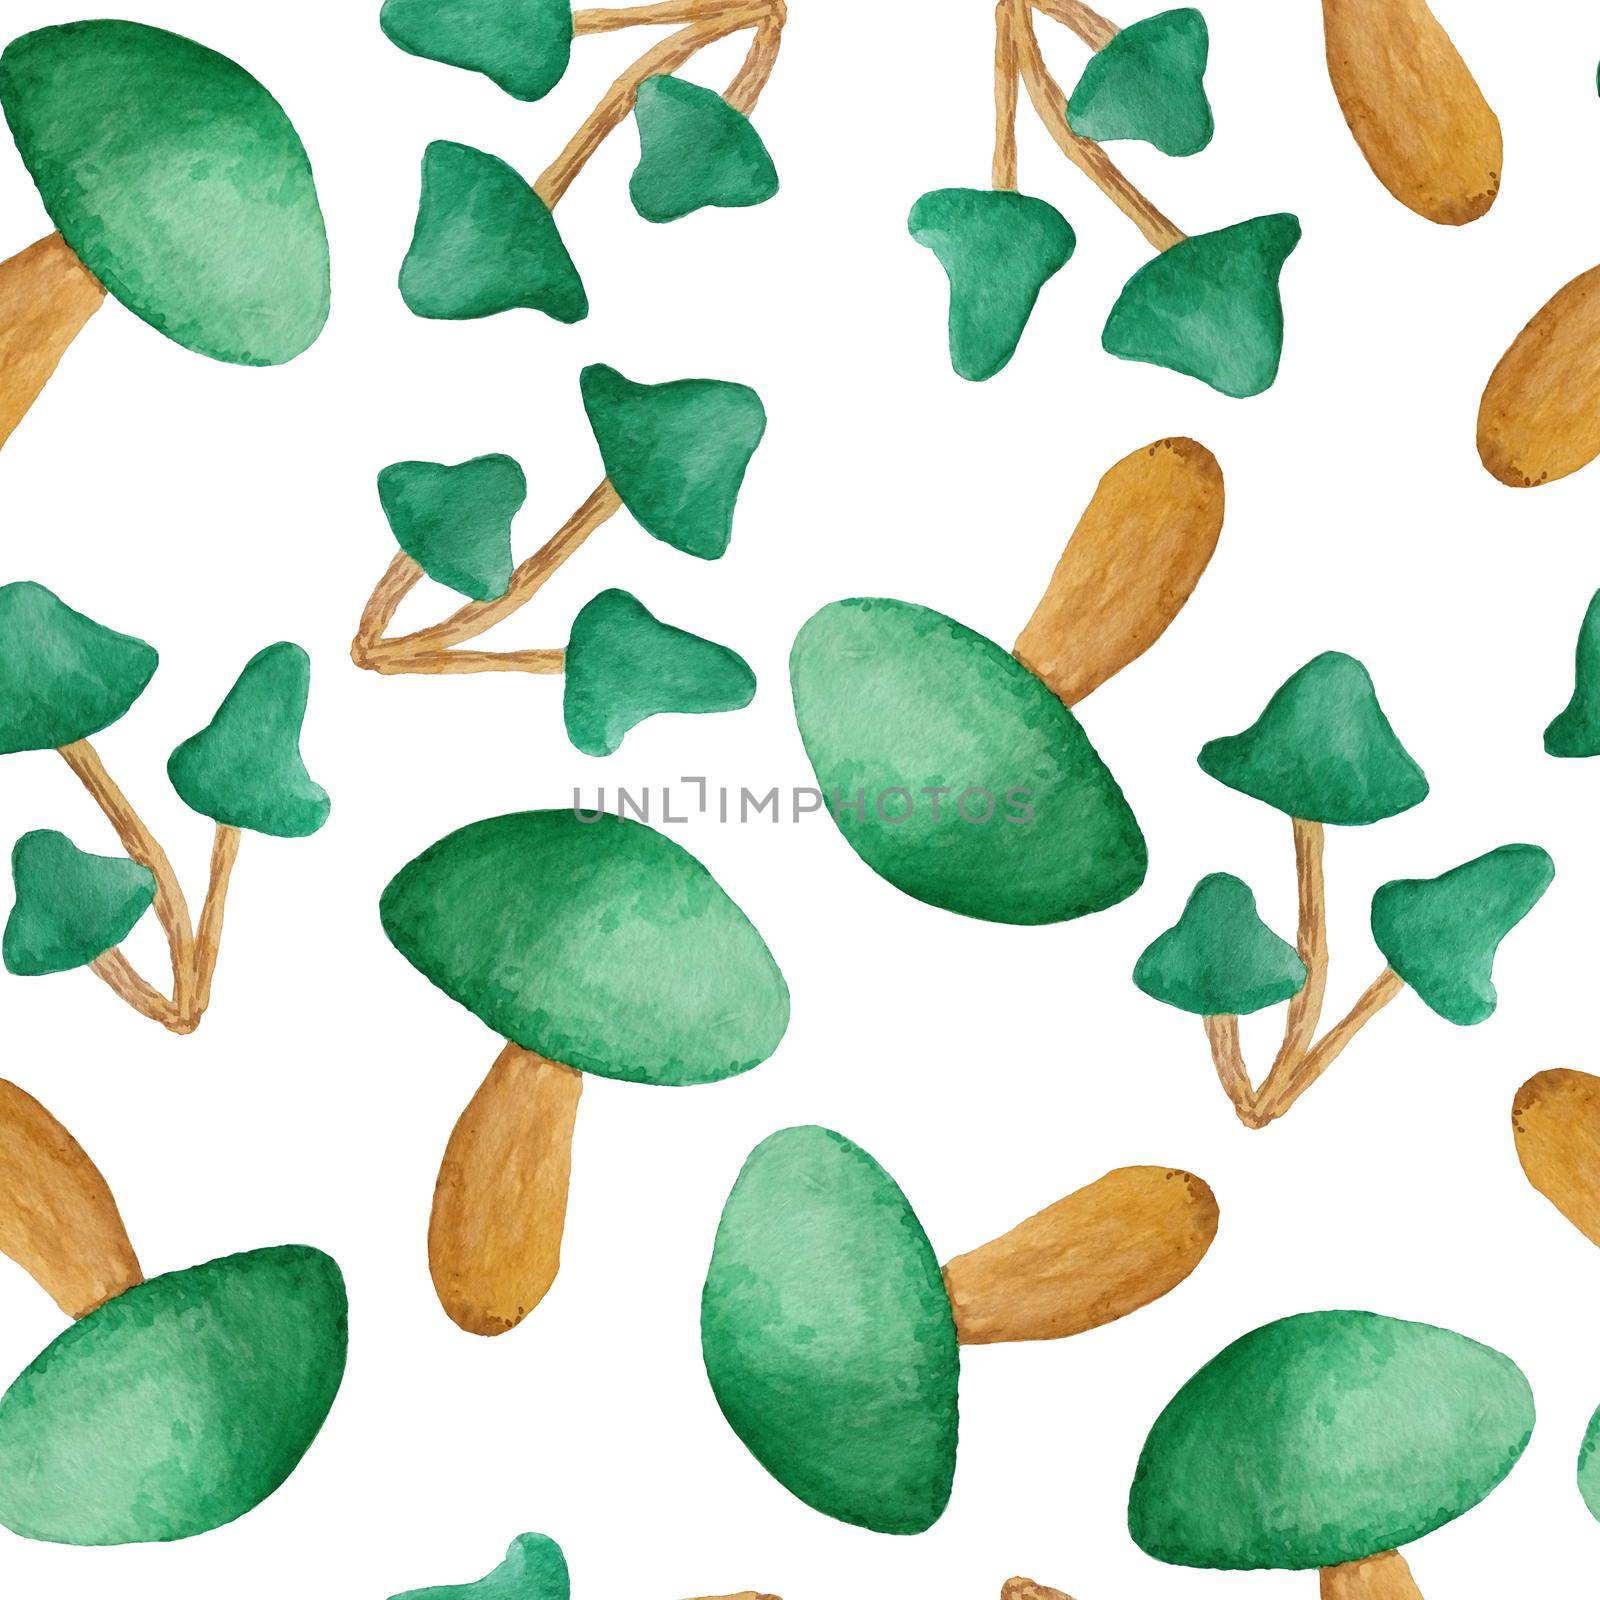 Seamless watercolor hand drawn pattern with St Patricks day elements, green funny realistic mushrooms, wood forest woodland background. Irish Ireland festive celebration desifn for parade parties. by Lagmar